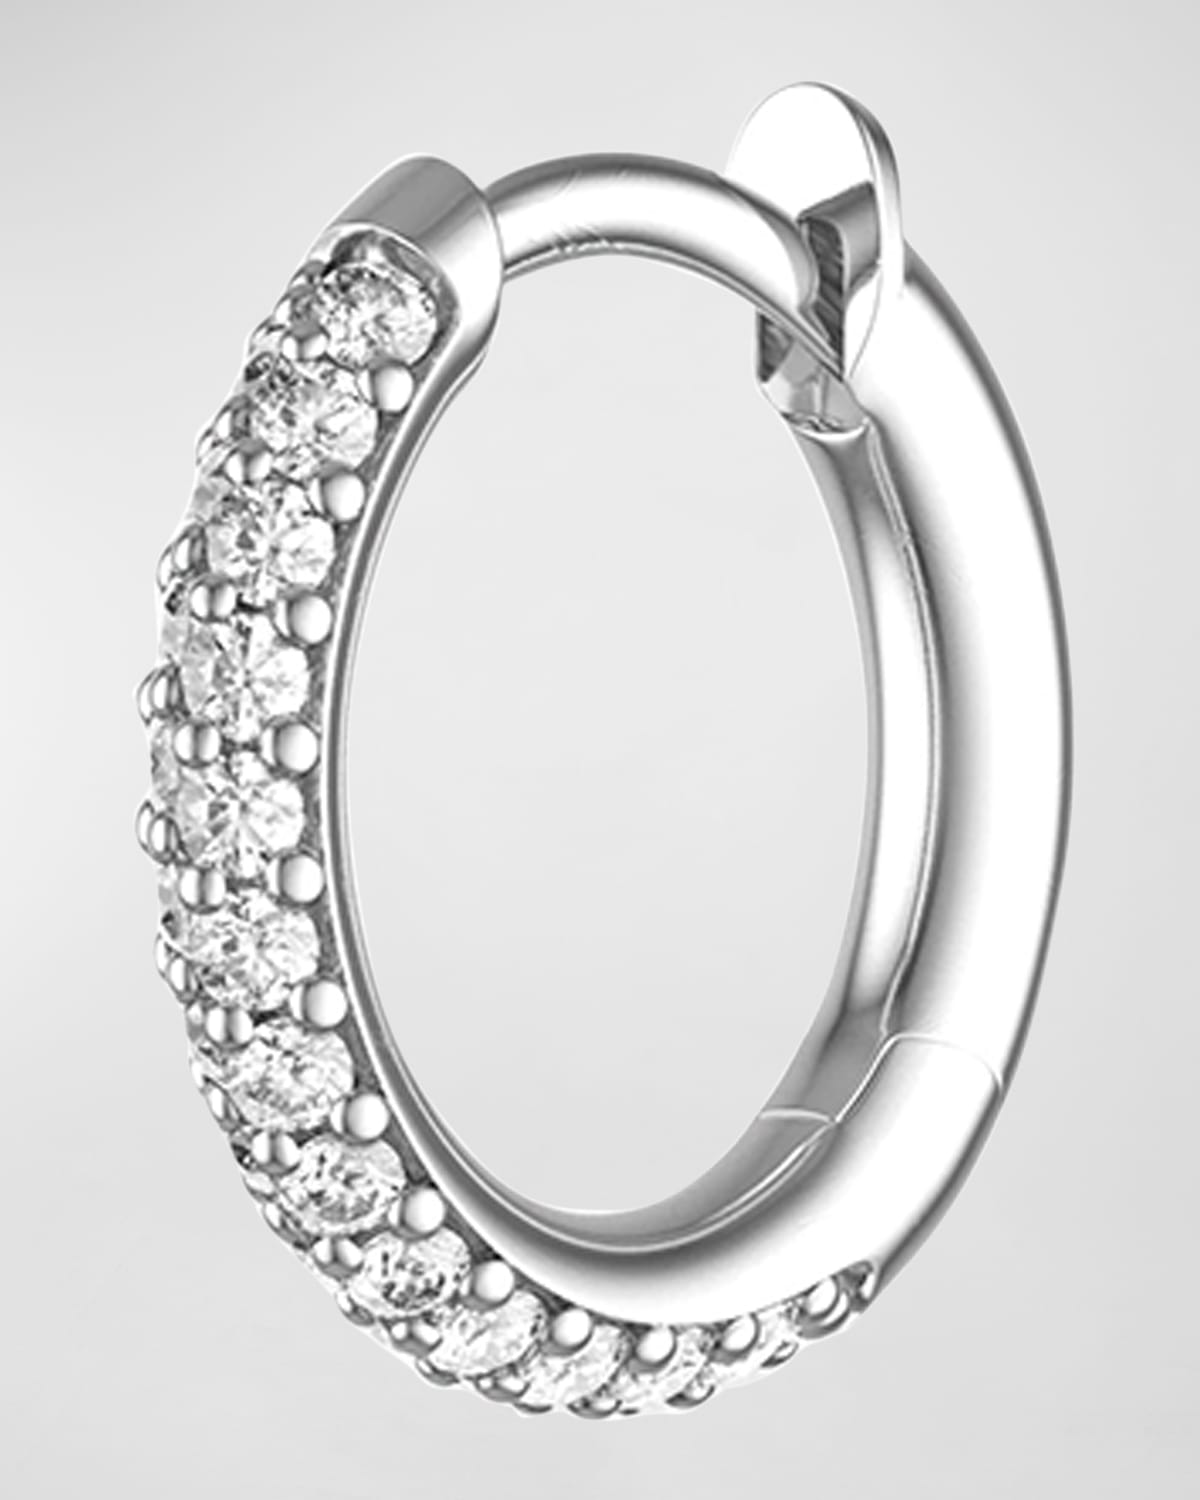 Men's Pave White Gold Gris 9mm Micro Hoop Earring with Diamonds, Single